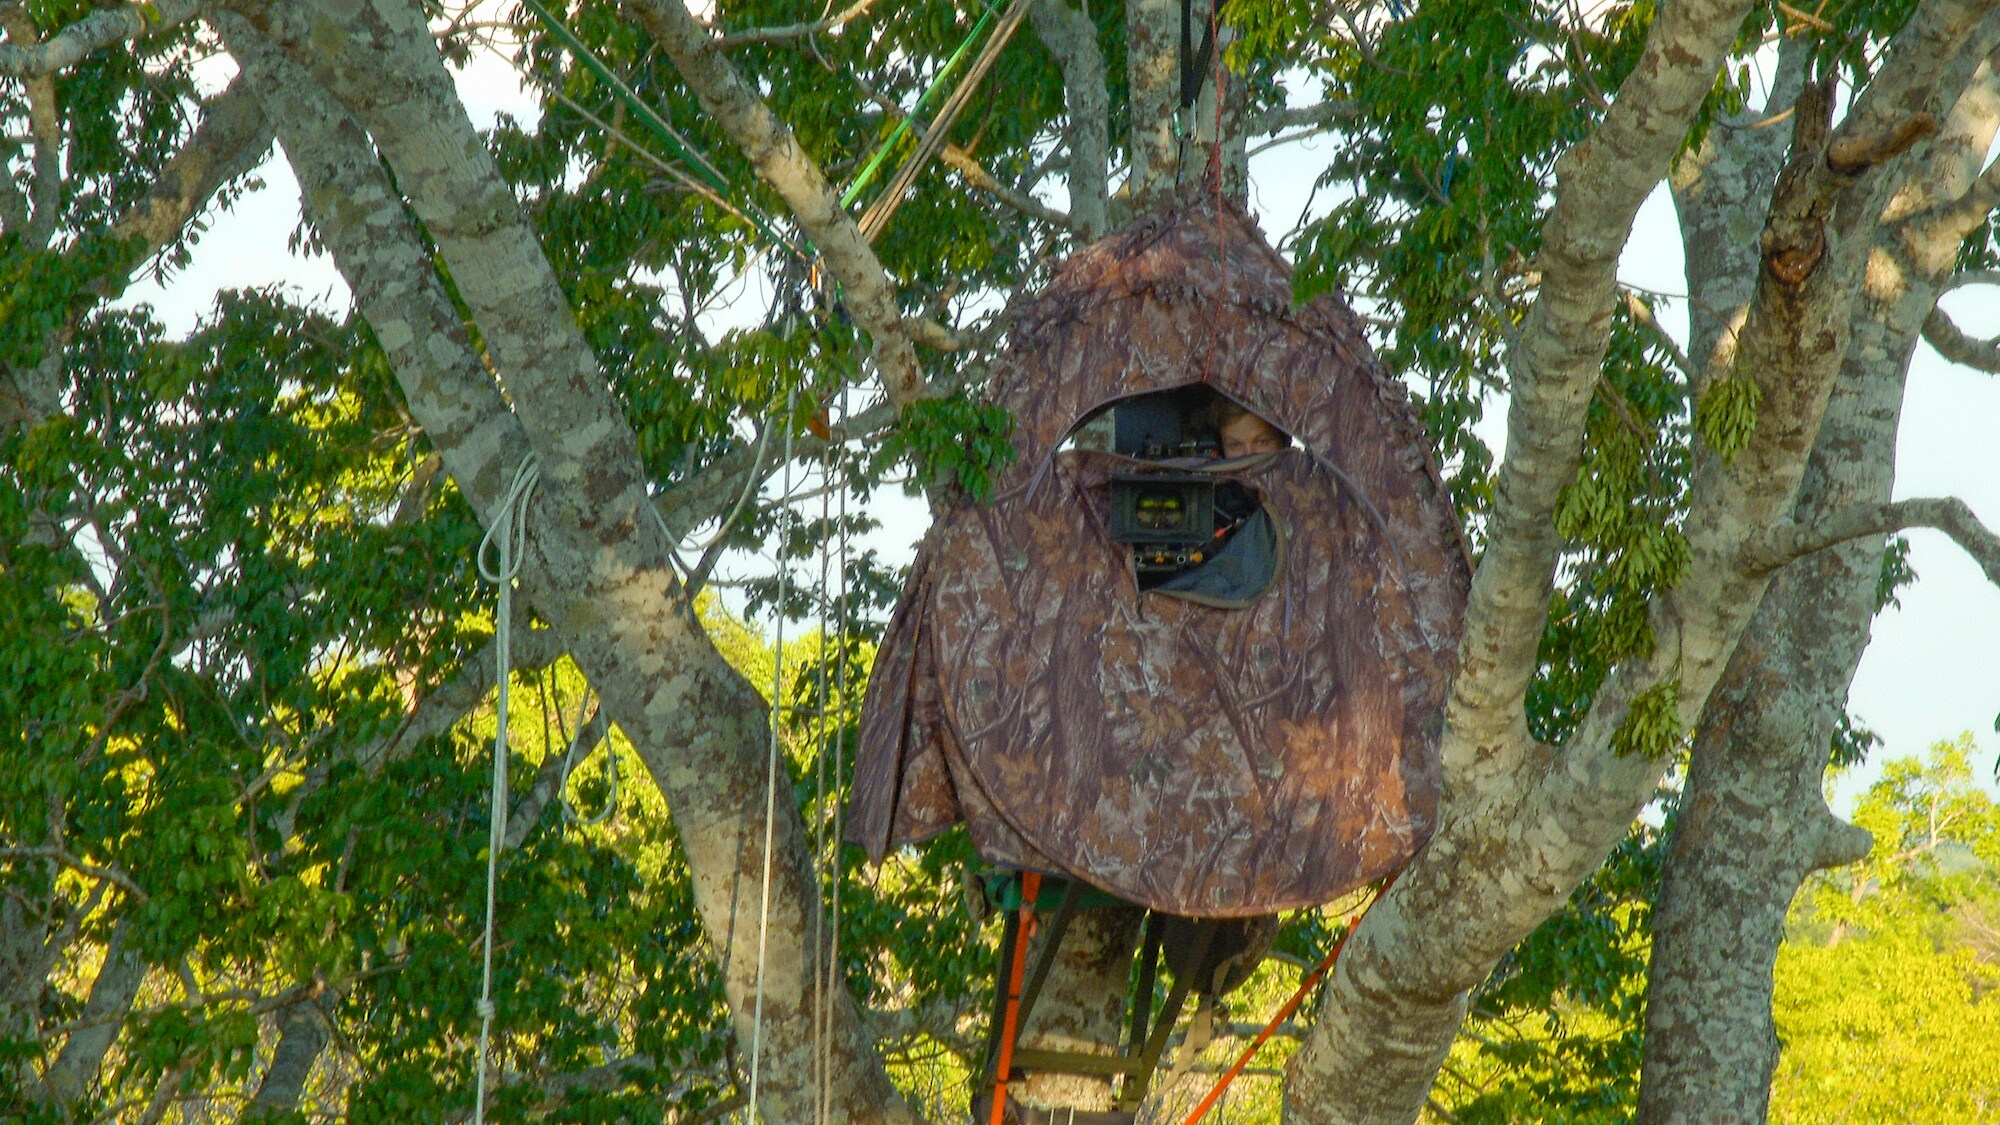 Bertie Gregory in a tree hide in Kasanka National Park. (Credit: National Geographic for Disney+)